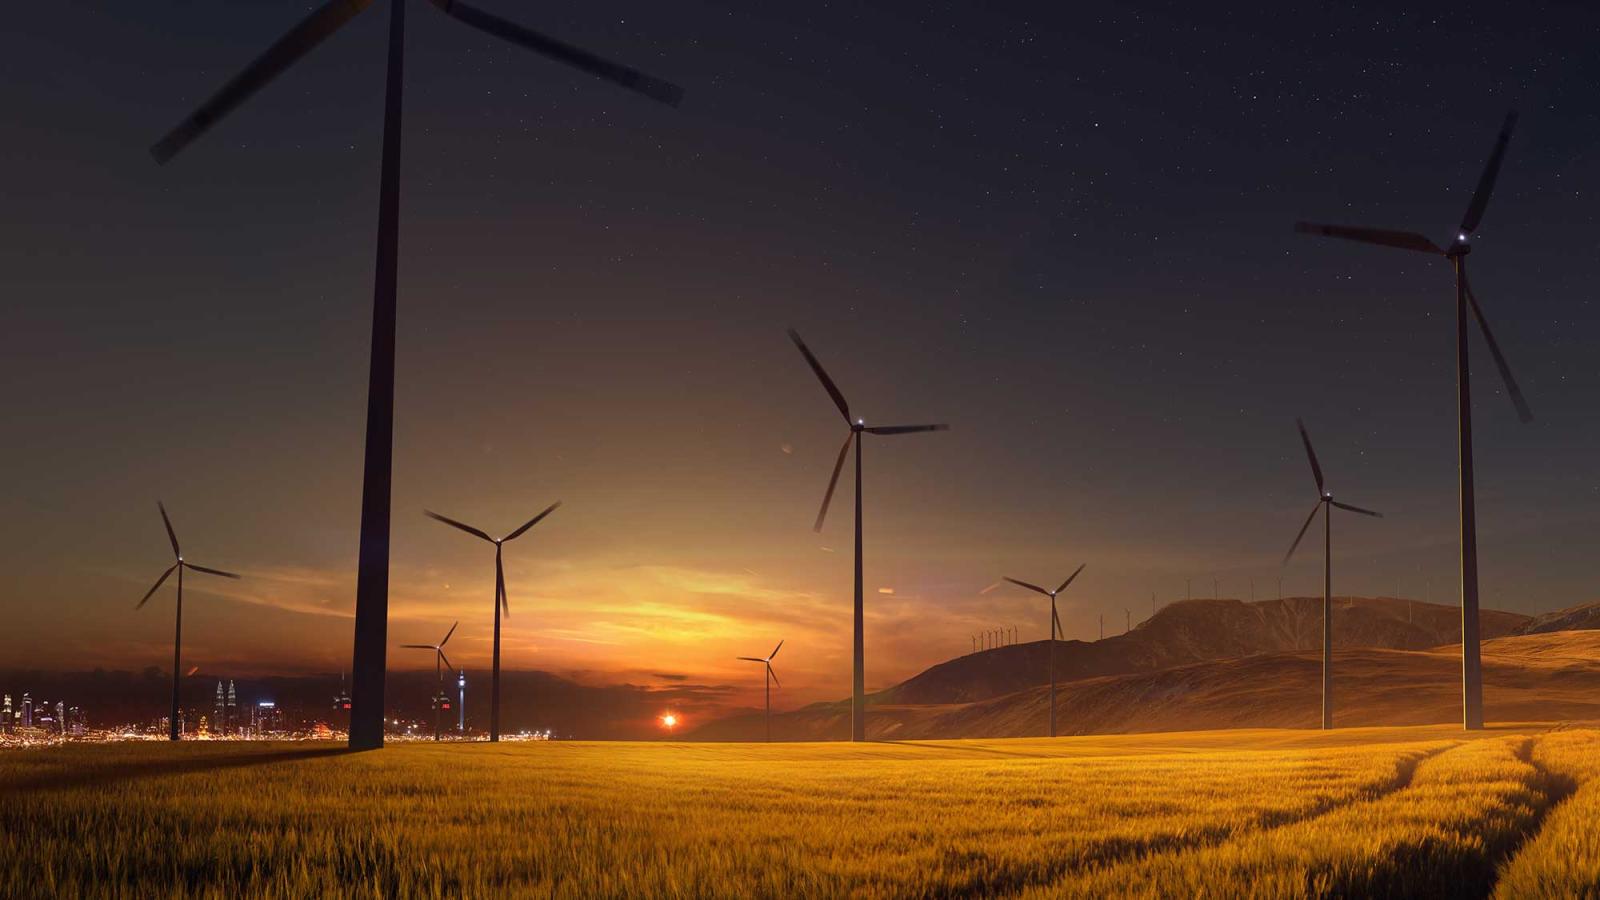 wind turbines in a field at sunset with a city in the background